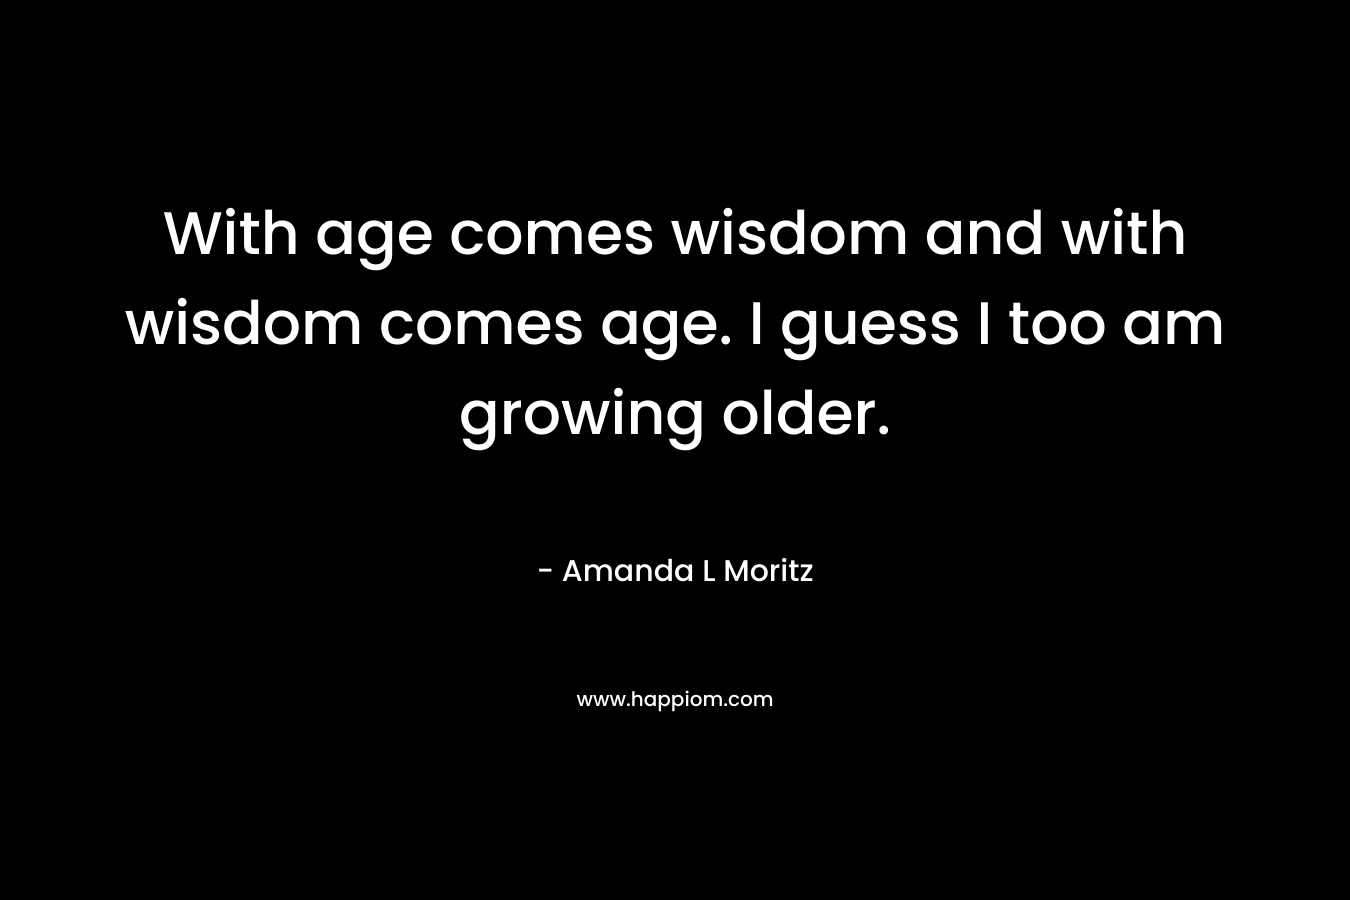 With age comes wisdom and with wisdom comes age. I guess I too am growing older.